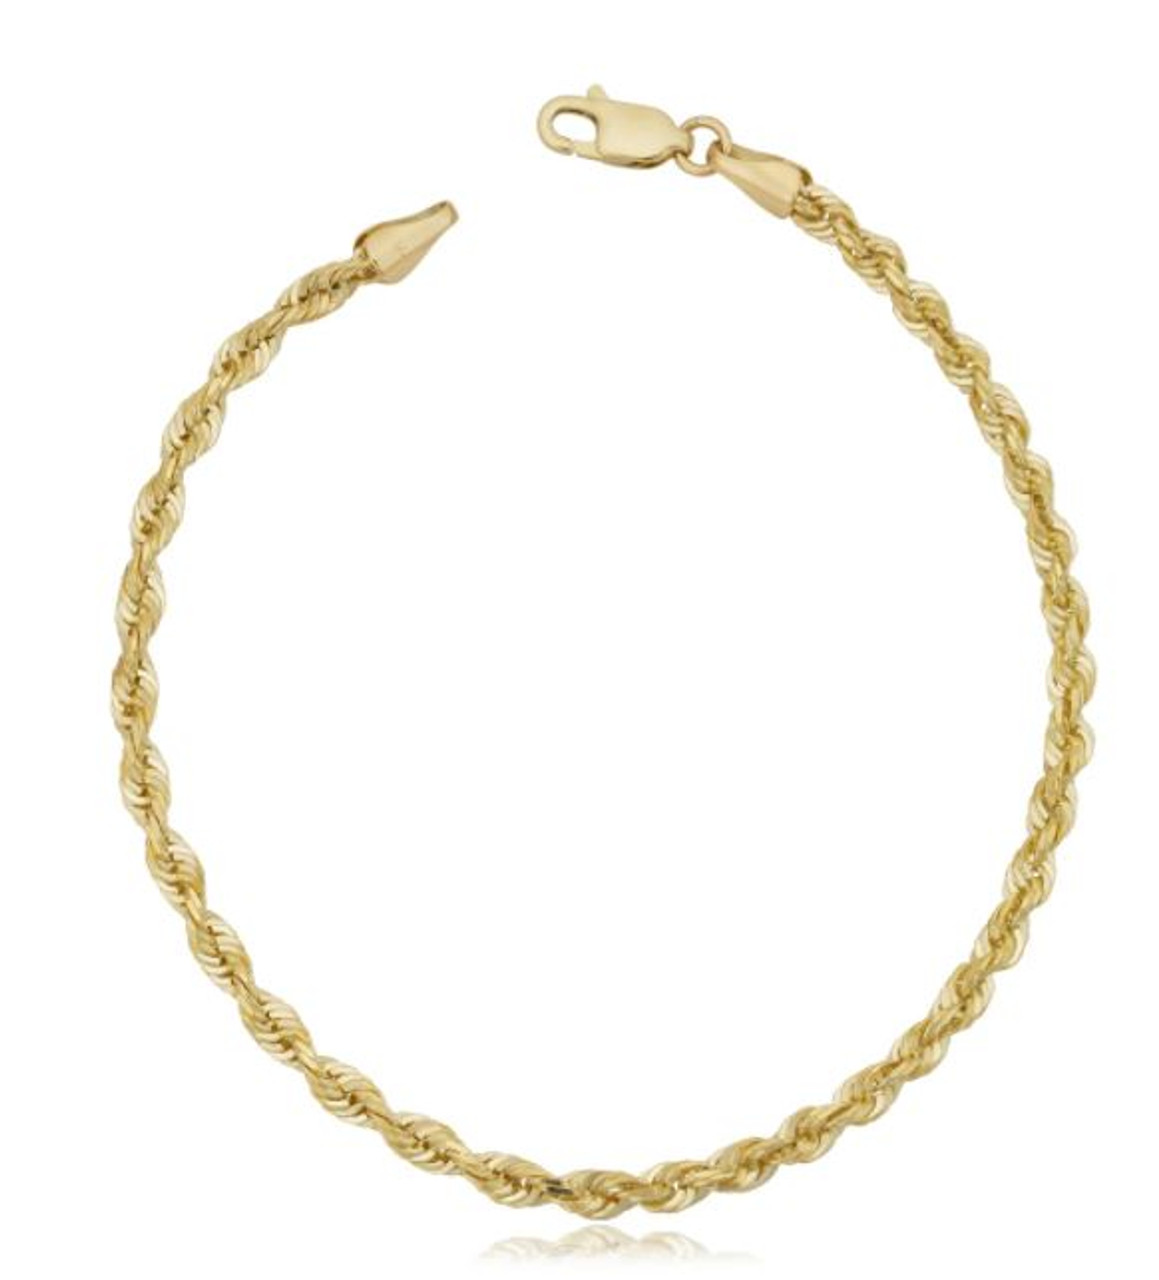 Buy 14k Yellow Gold Solid Diamond Cut Rope Bracelet 850 Inch 8mm Online at  SO ICY JEWELRY